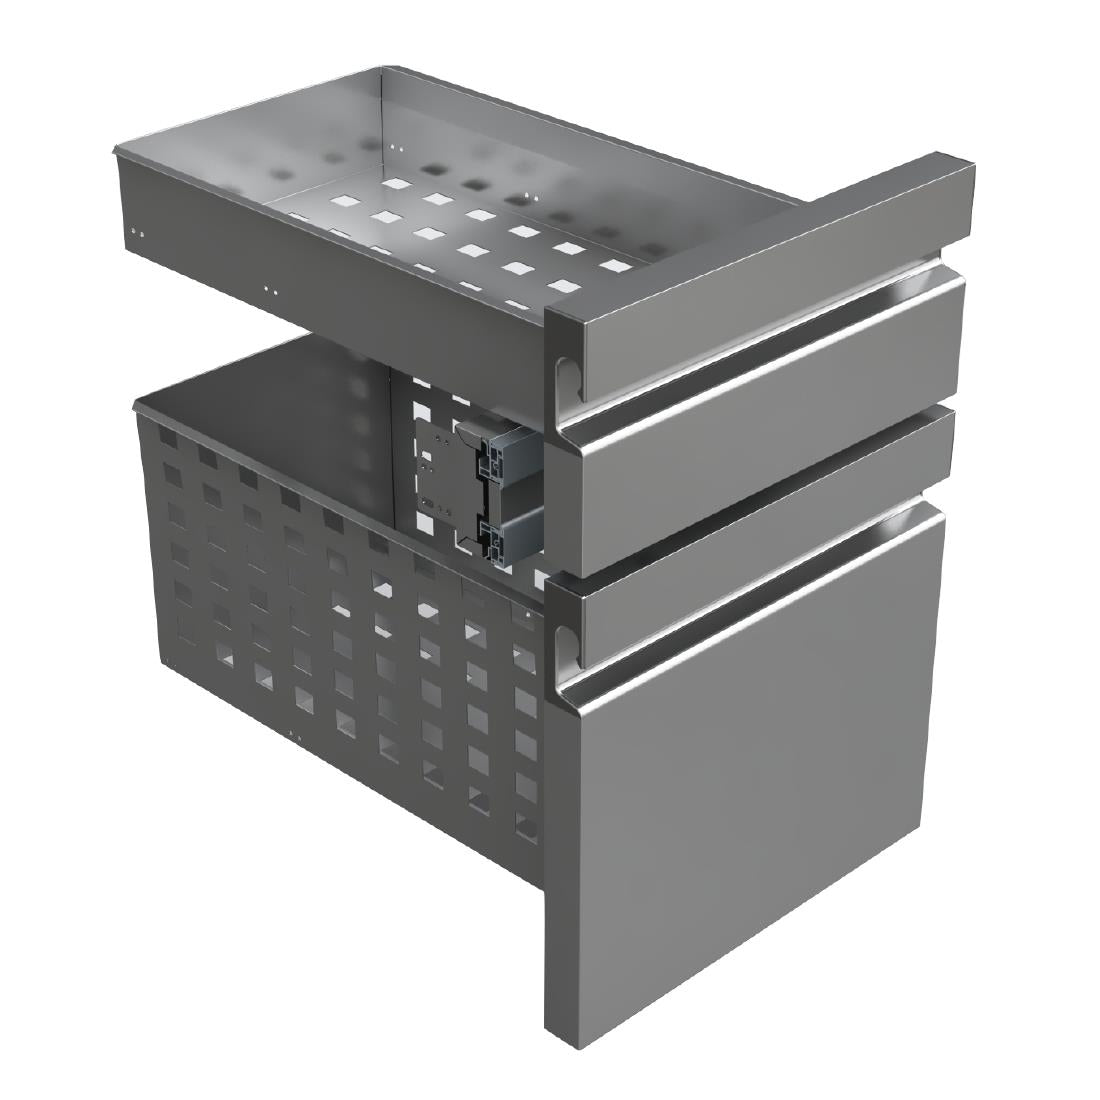 FU020 Fagor Advance Kit Drawers for Counter Units 1/3 & 2/3 GN ADV JD Catering Equipment Solutions Ltd